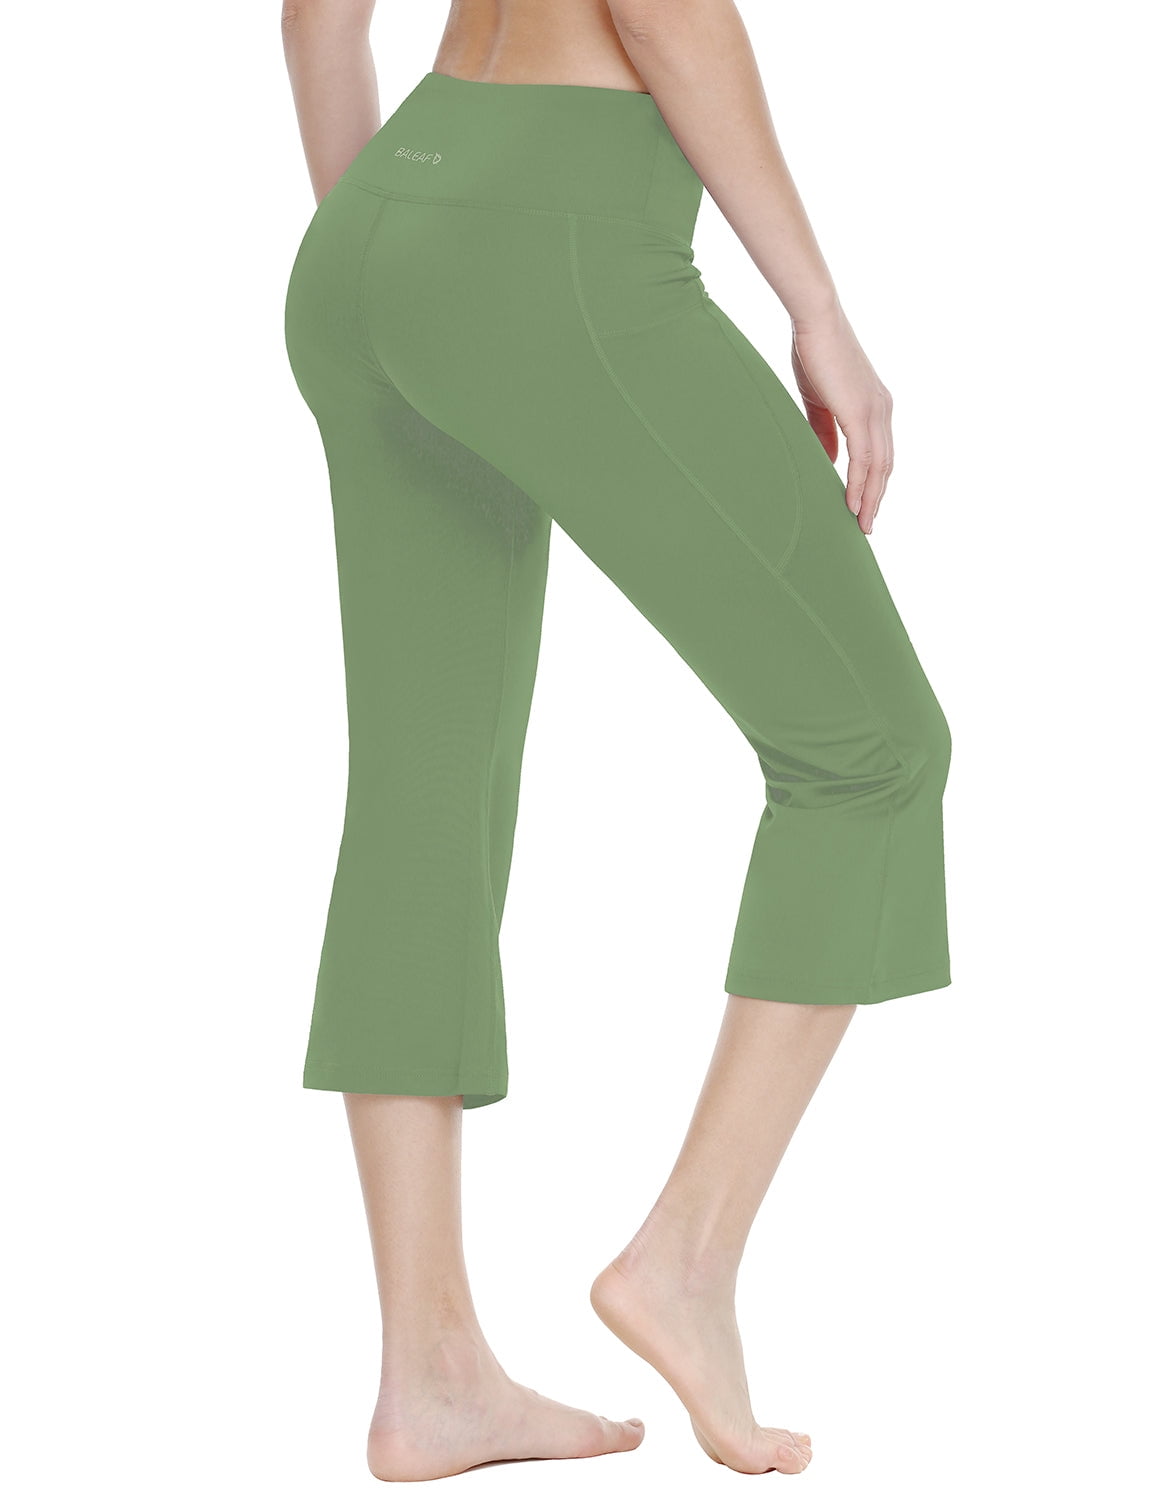 BALEAF Yoga Workout Capris for Women Lounge Flare Pants Casual